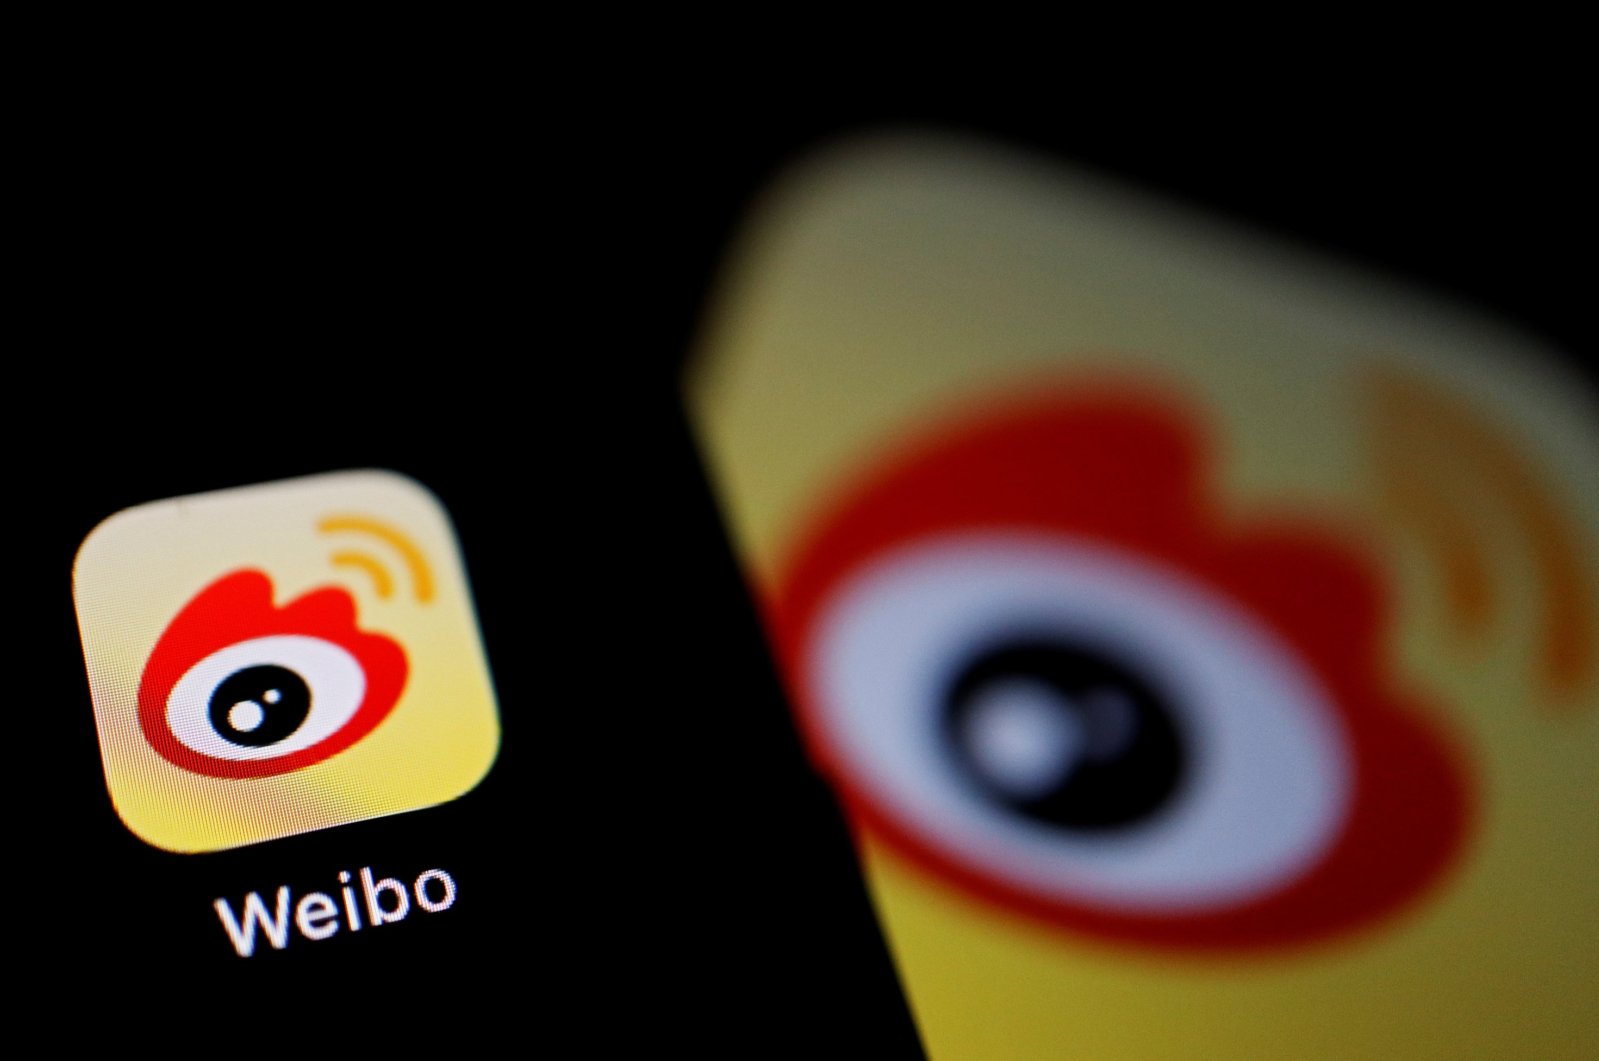 The logo of Chinese social media app Weibo is seen on a mobile phone in this illustration picture, Dec. 7, 2021. (Reuters Photo)